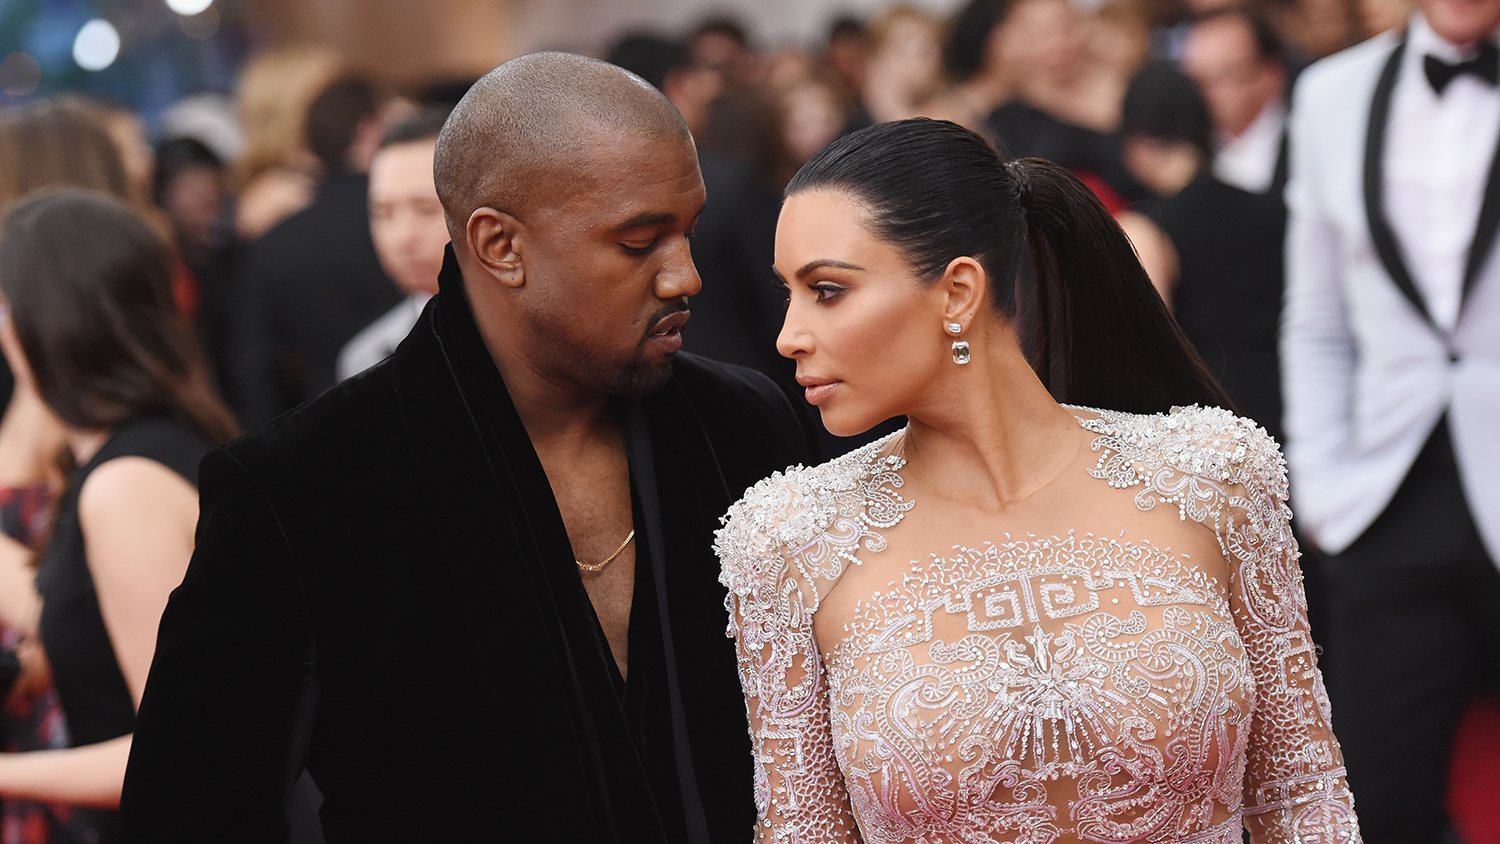 Kanye West (L) and Kim Kardashian attend the 'China: Through The Looking Glass' Costume Institute Benefit Gala at the Metropolitan Museum of Art on May 4, 2015 in New York City.
